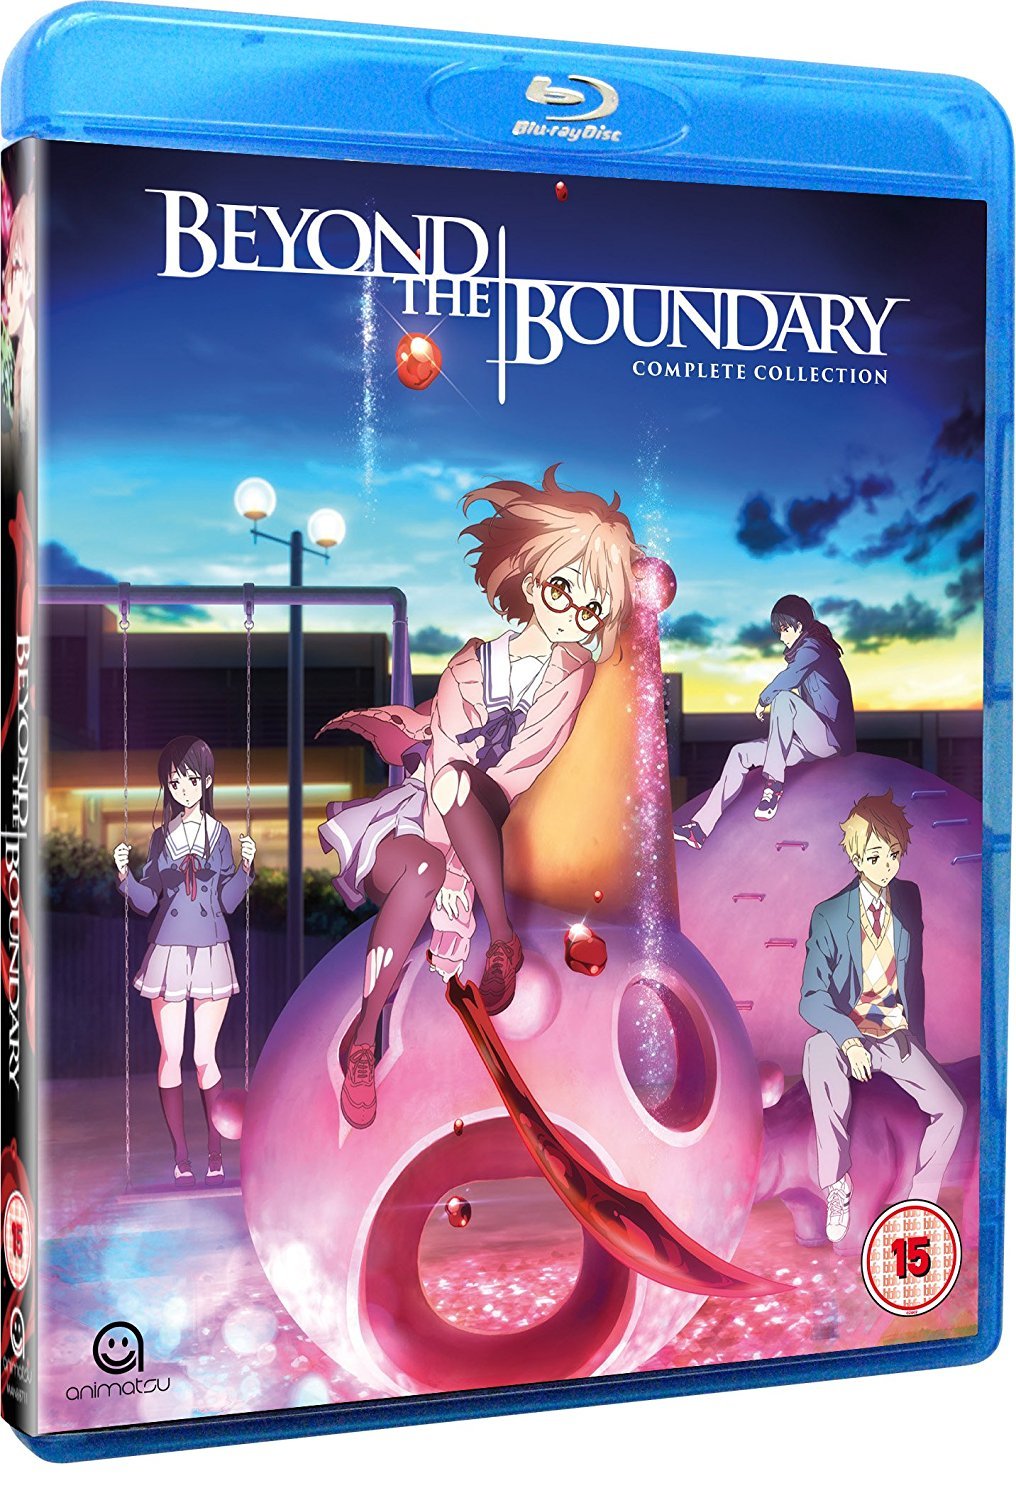 Beyond the Boundary: Complete Collection [Blu-ray] [3 Discs] - Best Buy